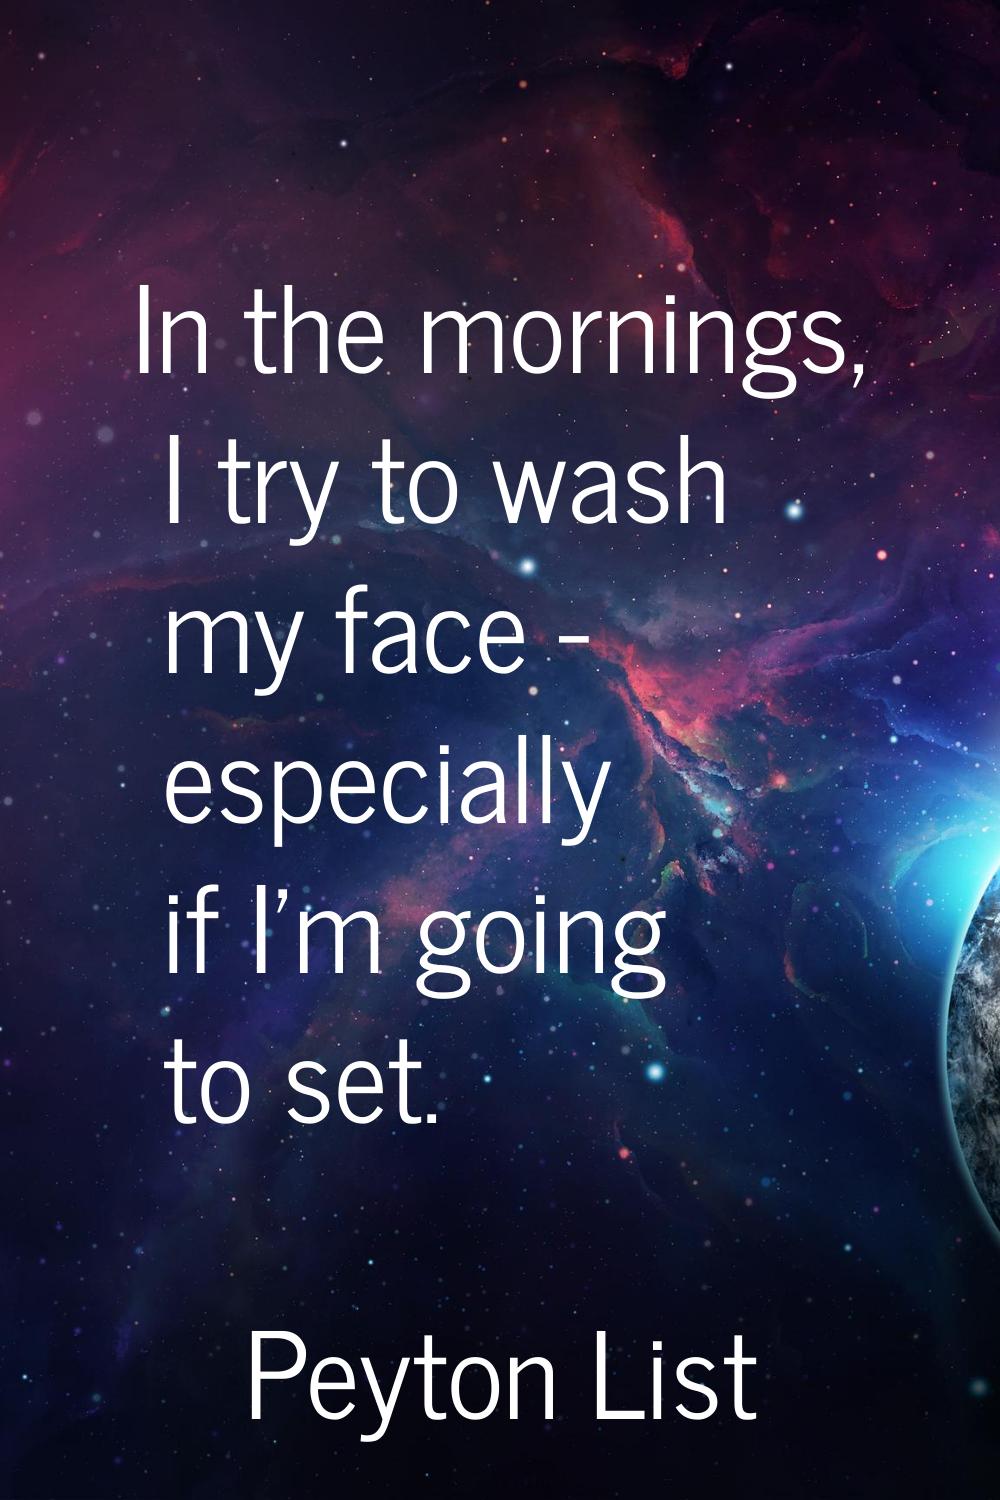 In the mornings, I try to wash my face - especially if I'm going to set.